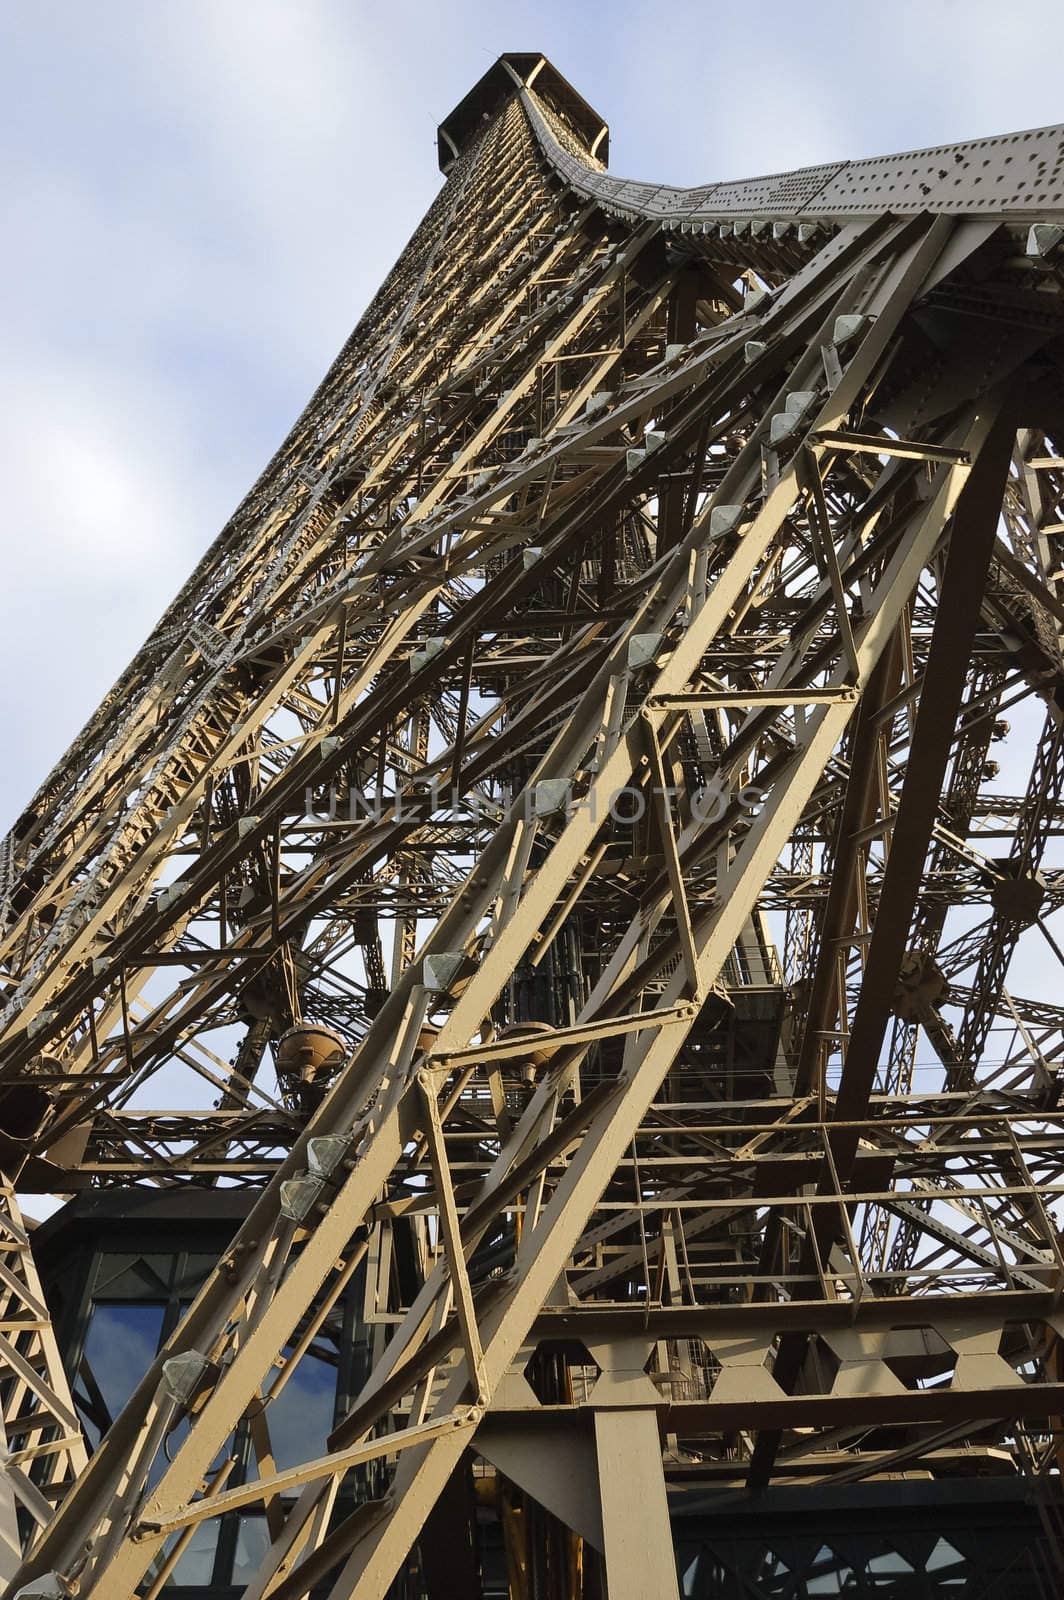 Wide-angle view of Eiffel Tower, Paris, France, from below showing details of iron structure against blue sky